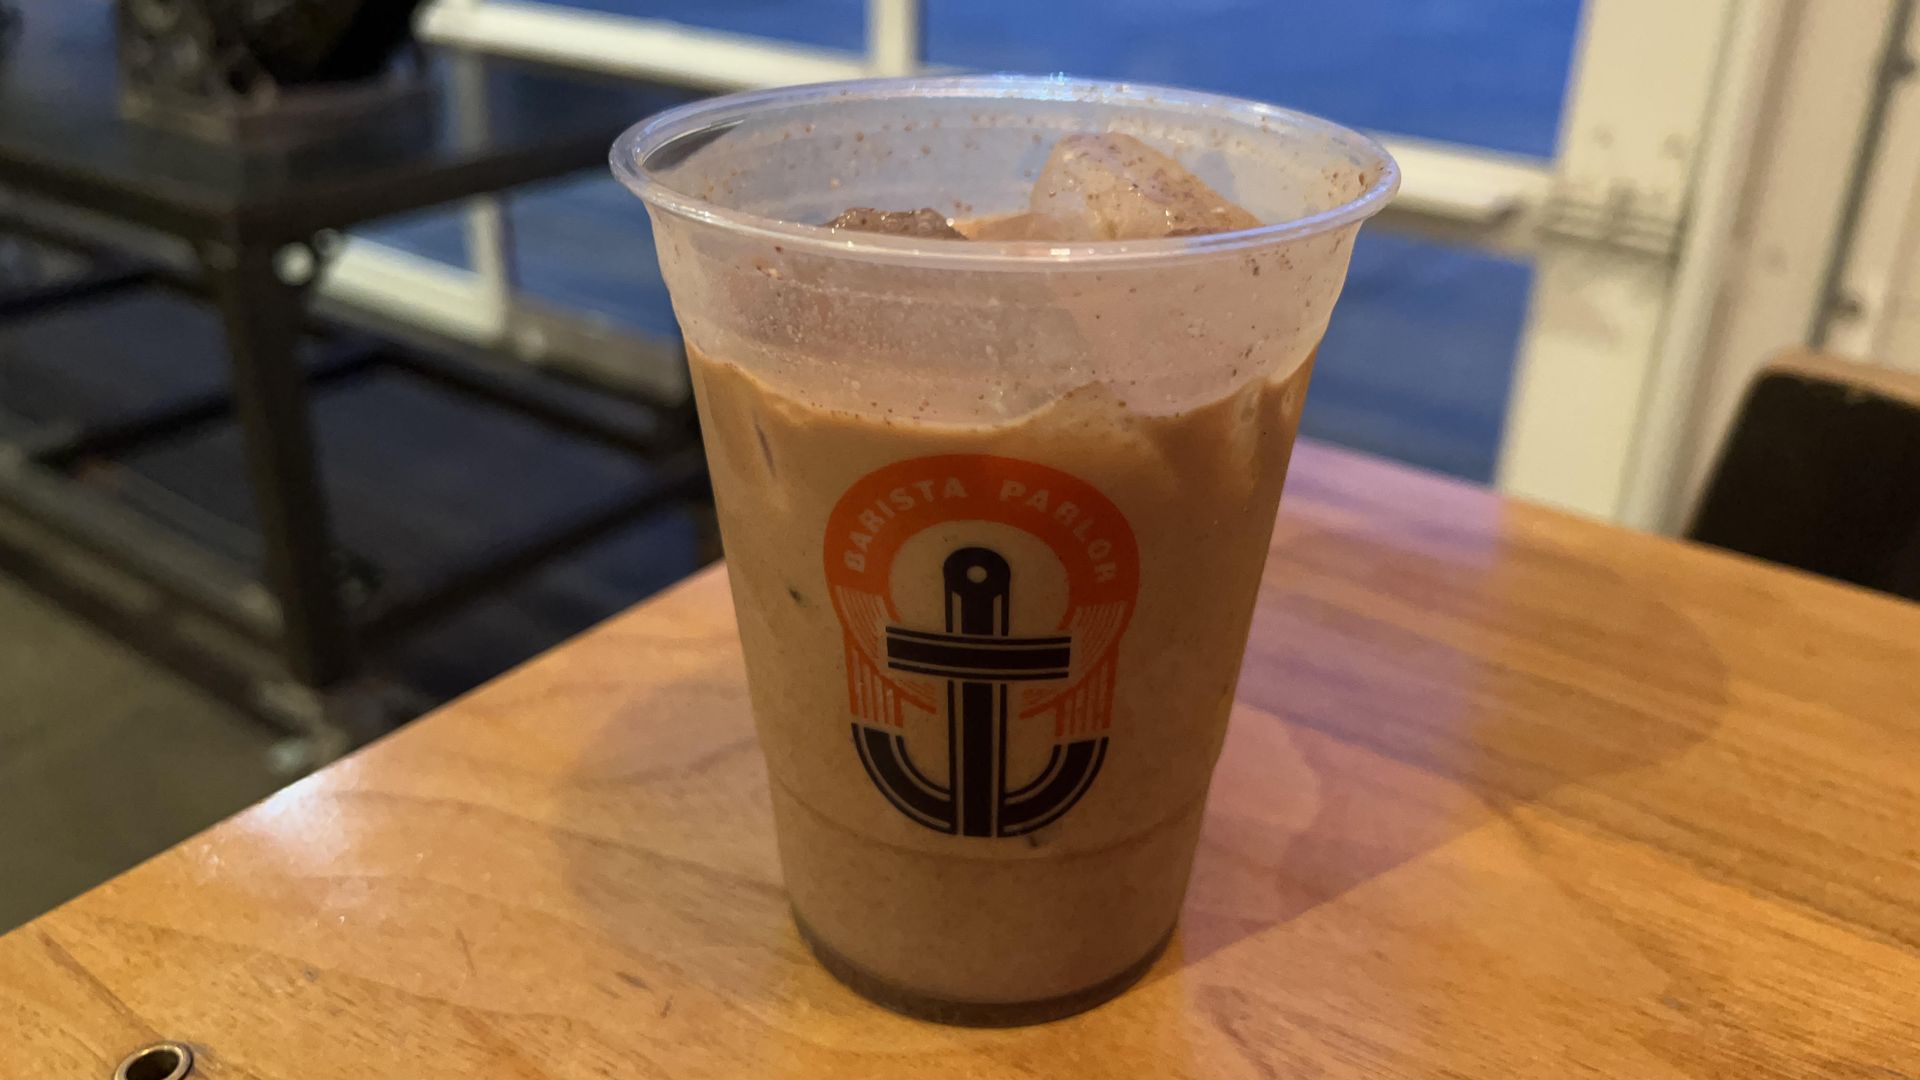 The spiced cold brew in a to-go cup at Barista Parlor.